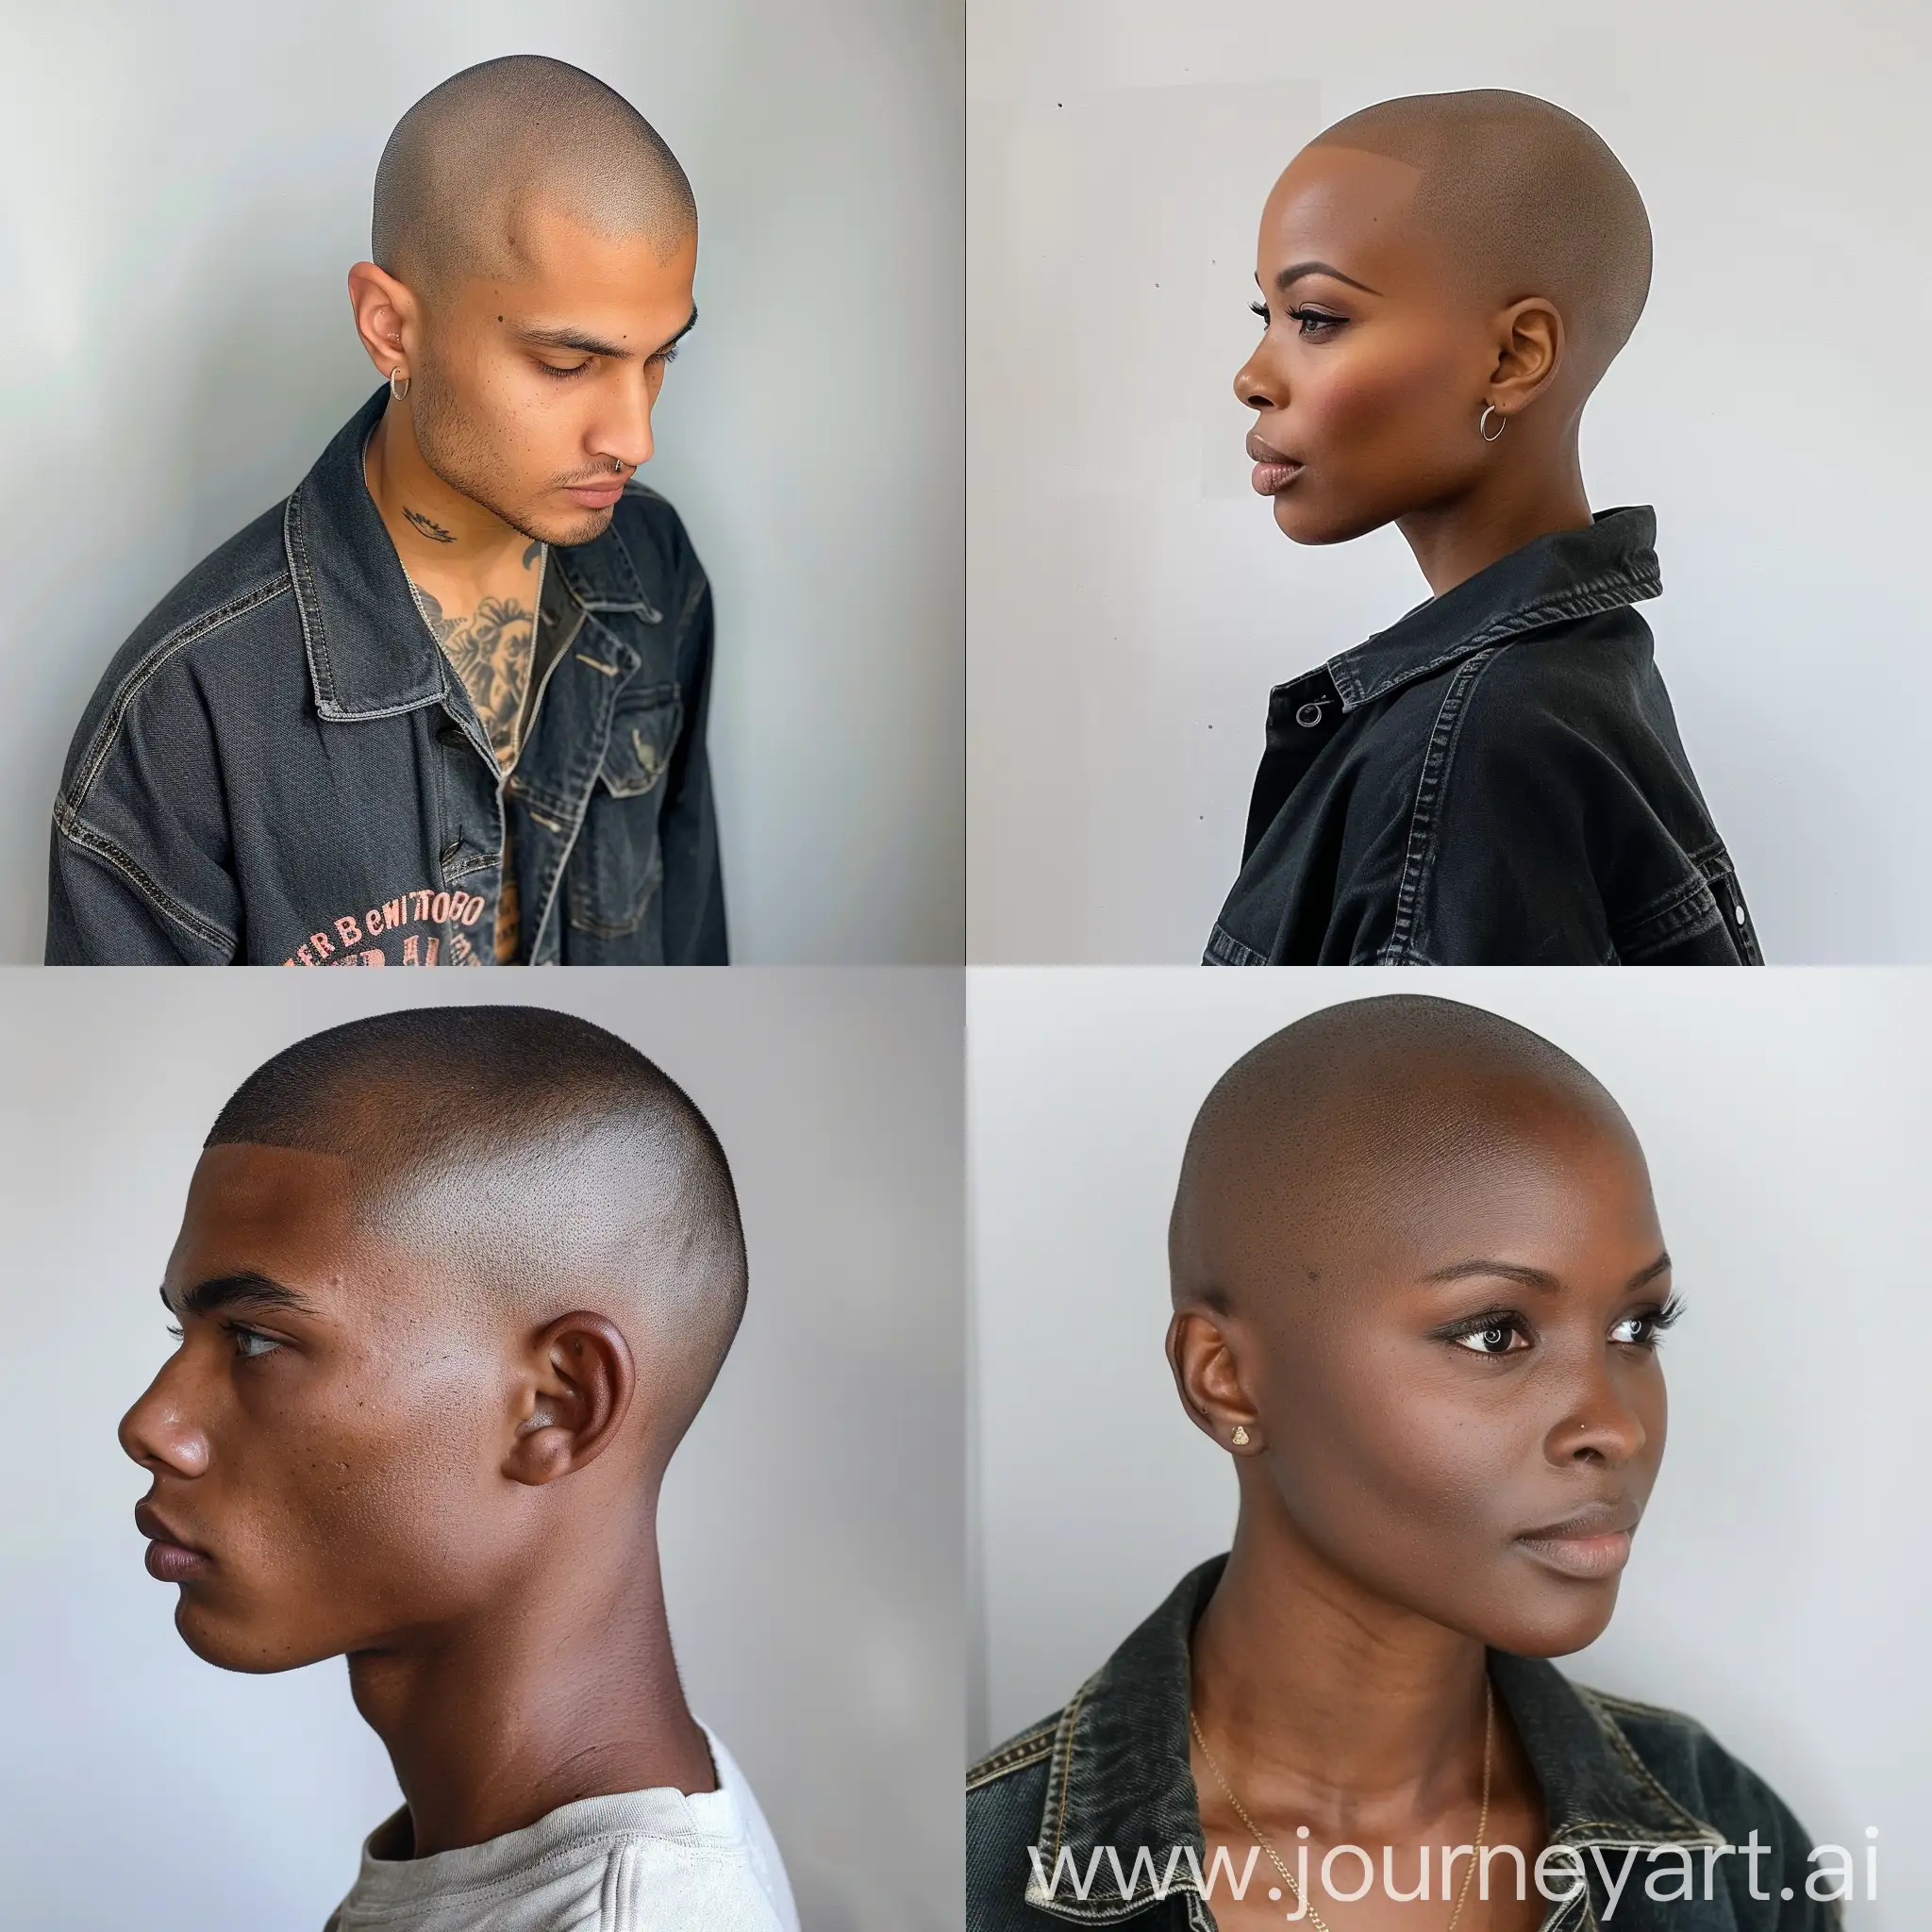 Young-Man-with-Black-Bald-Fade-Hair-in-Urban-Setting